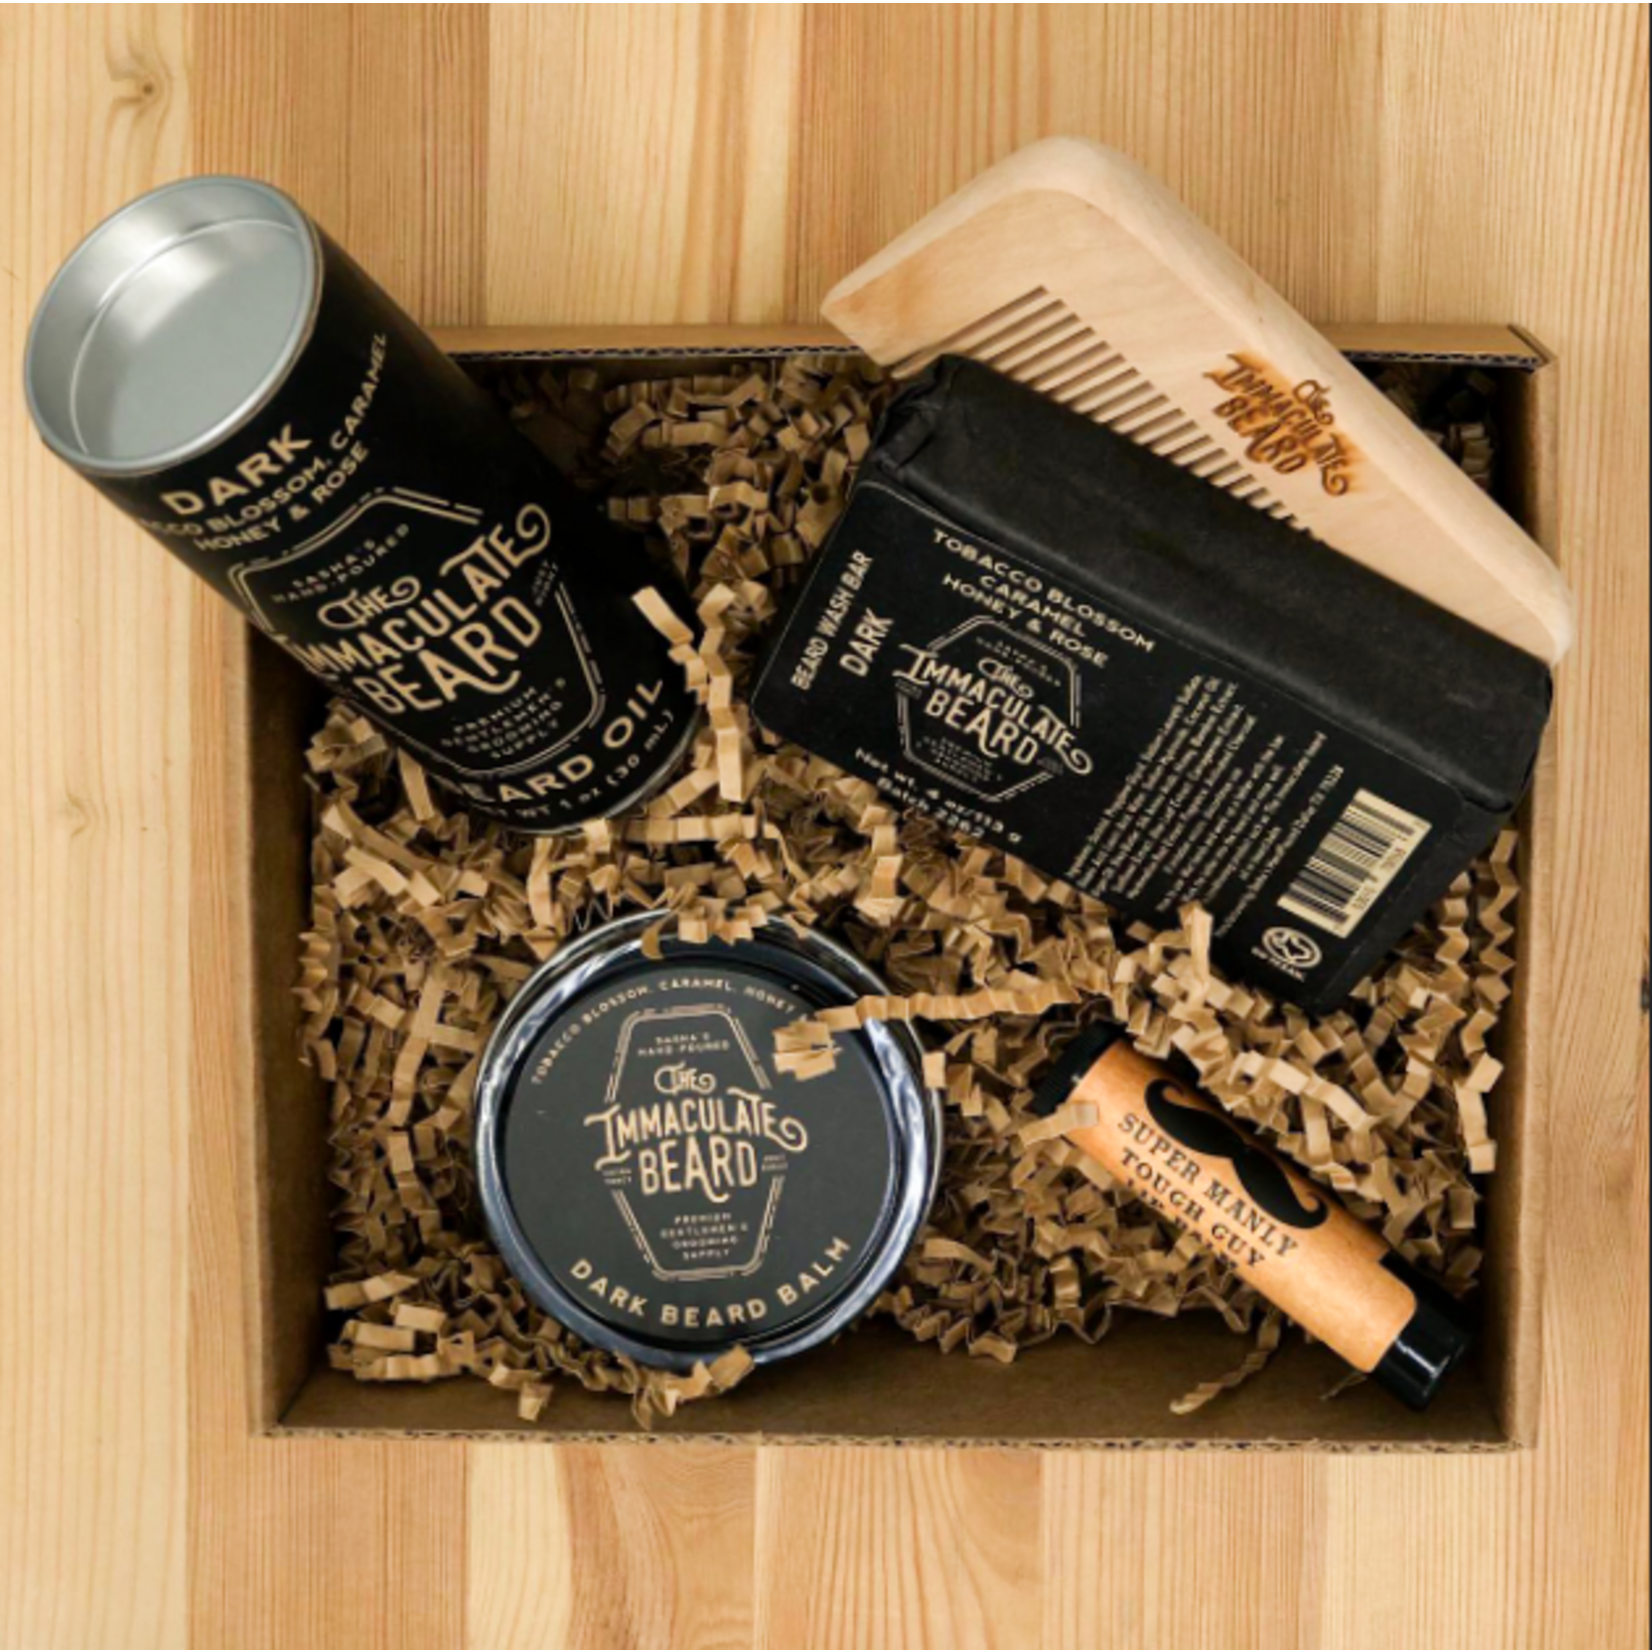 Assorted Beard Grooming items, including a comb and oil in box